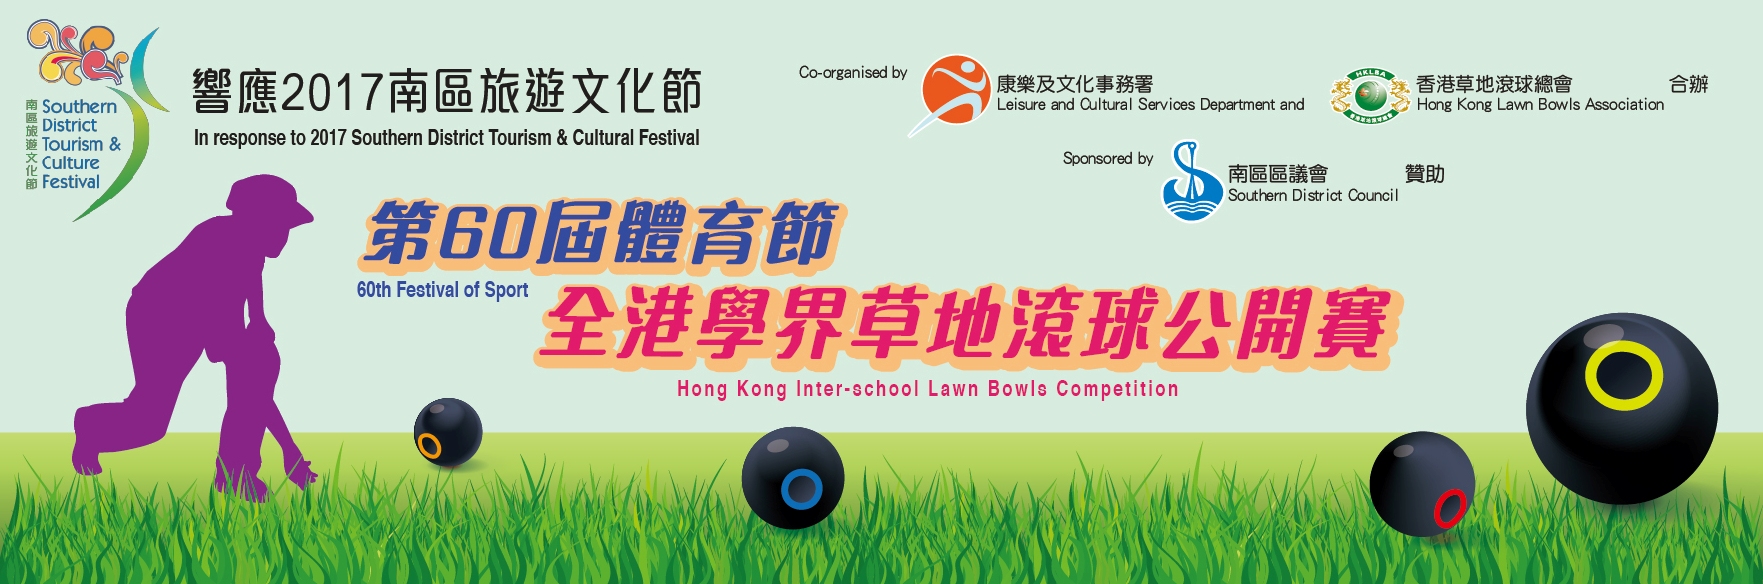 Hong Kong Inter-schools Lawn Bowls Competition 2017 (Updated on 18/4/17)